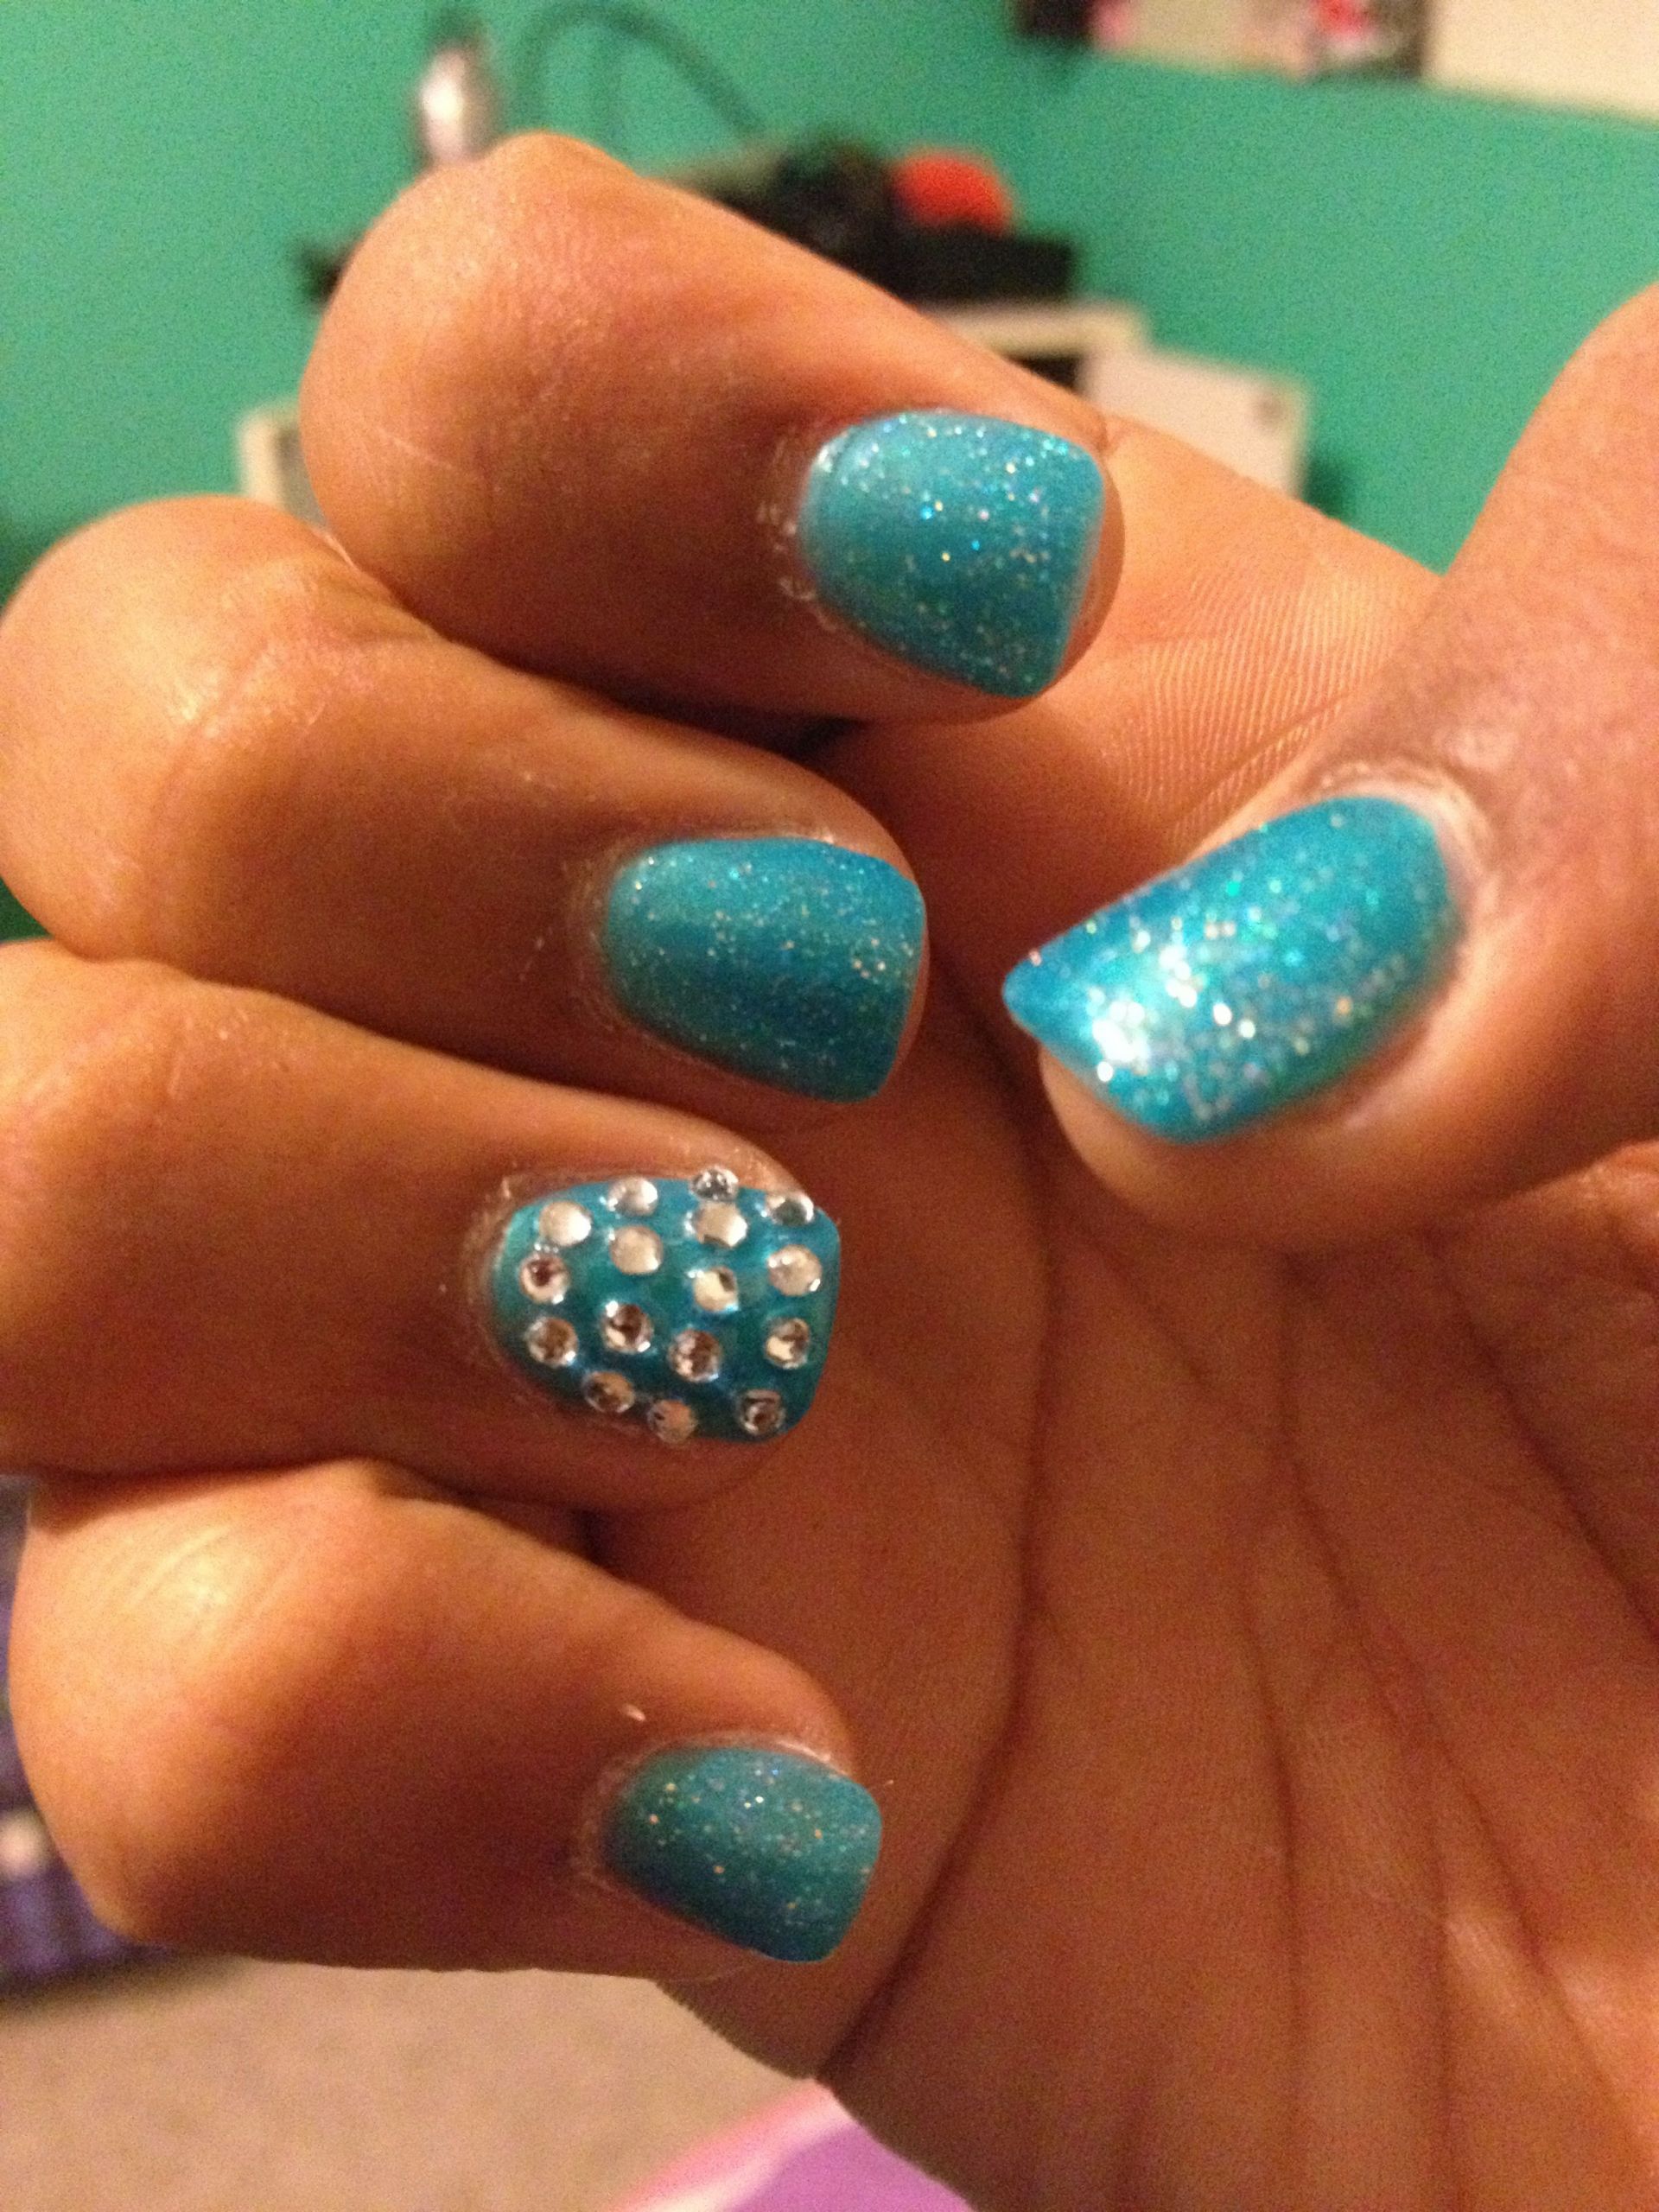 Images Of Pretty Nails
 Nails acrylics accent nail rhinestones pretty cute